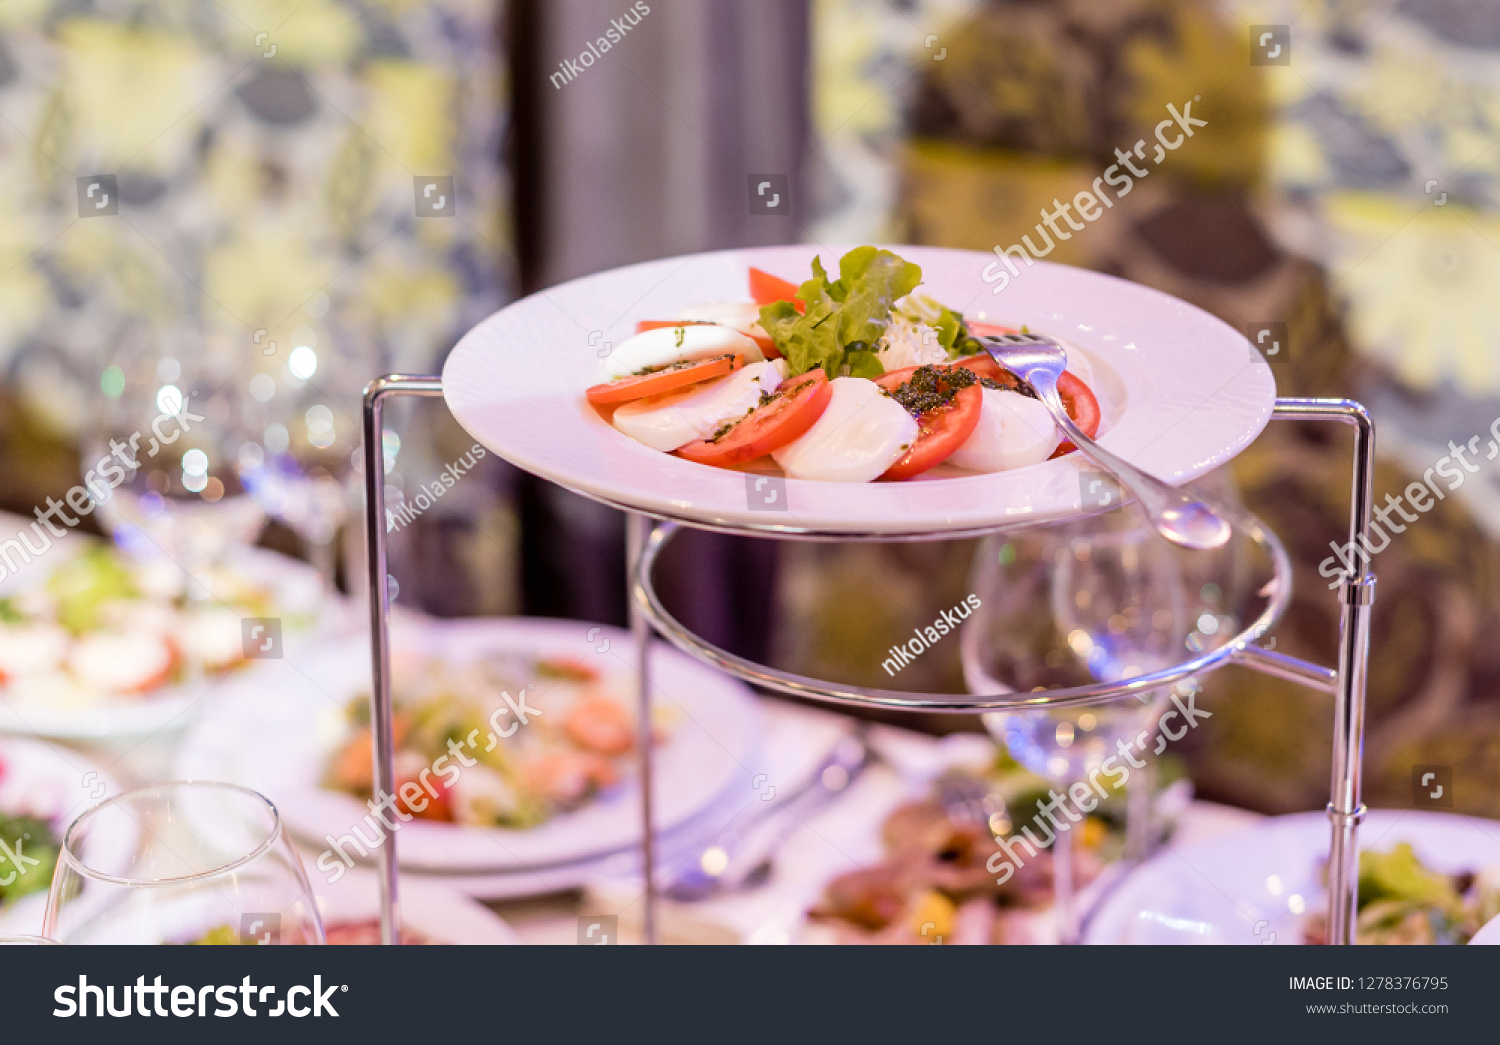 Serving dishes in the restaurant. luxury dinner served on the table #1278376795